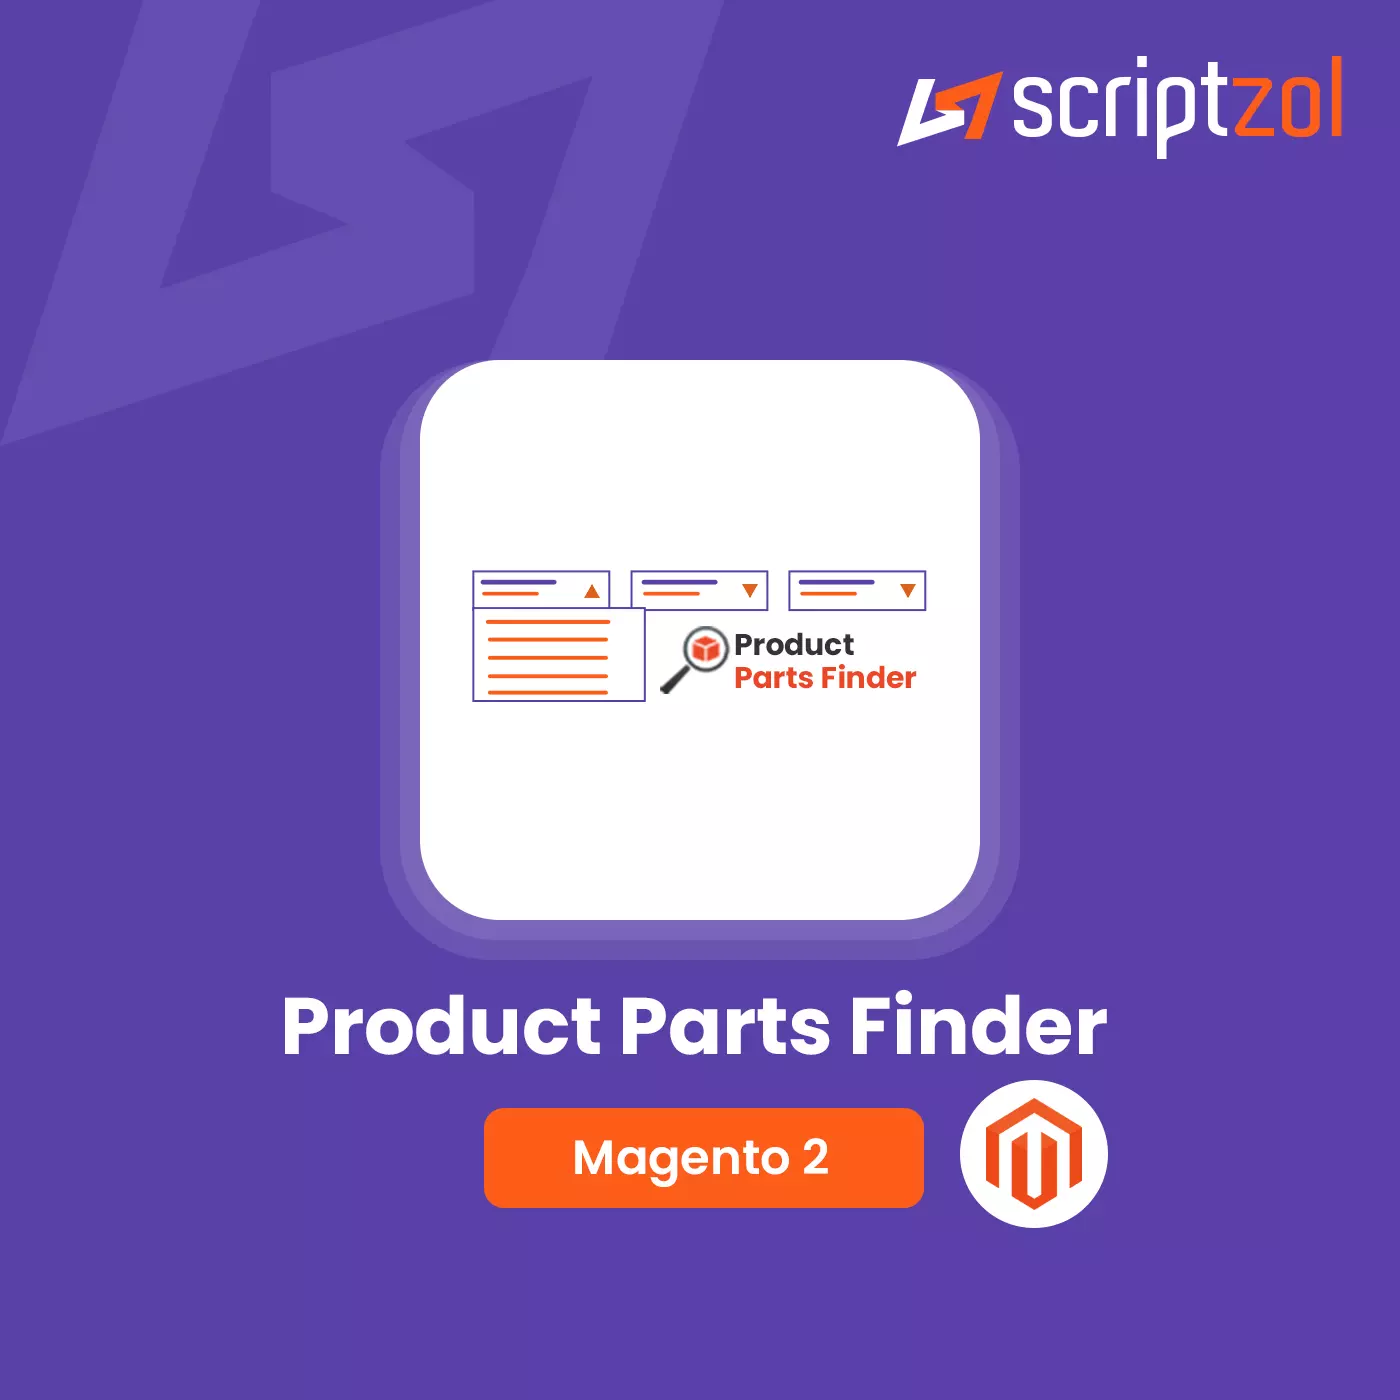 Magento 2 Product Parts Finder